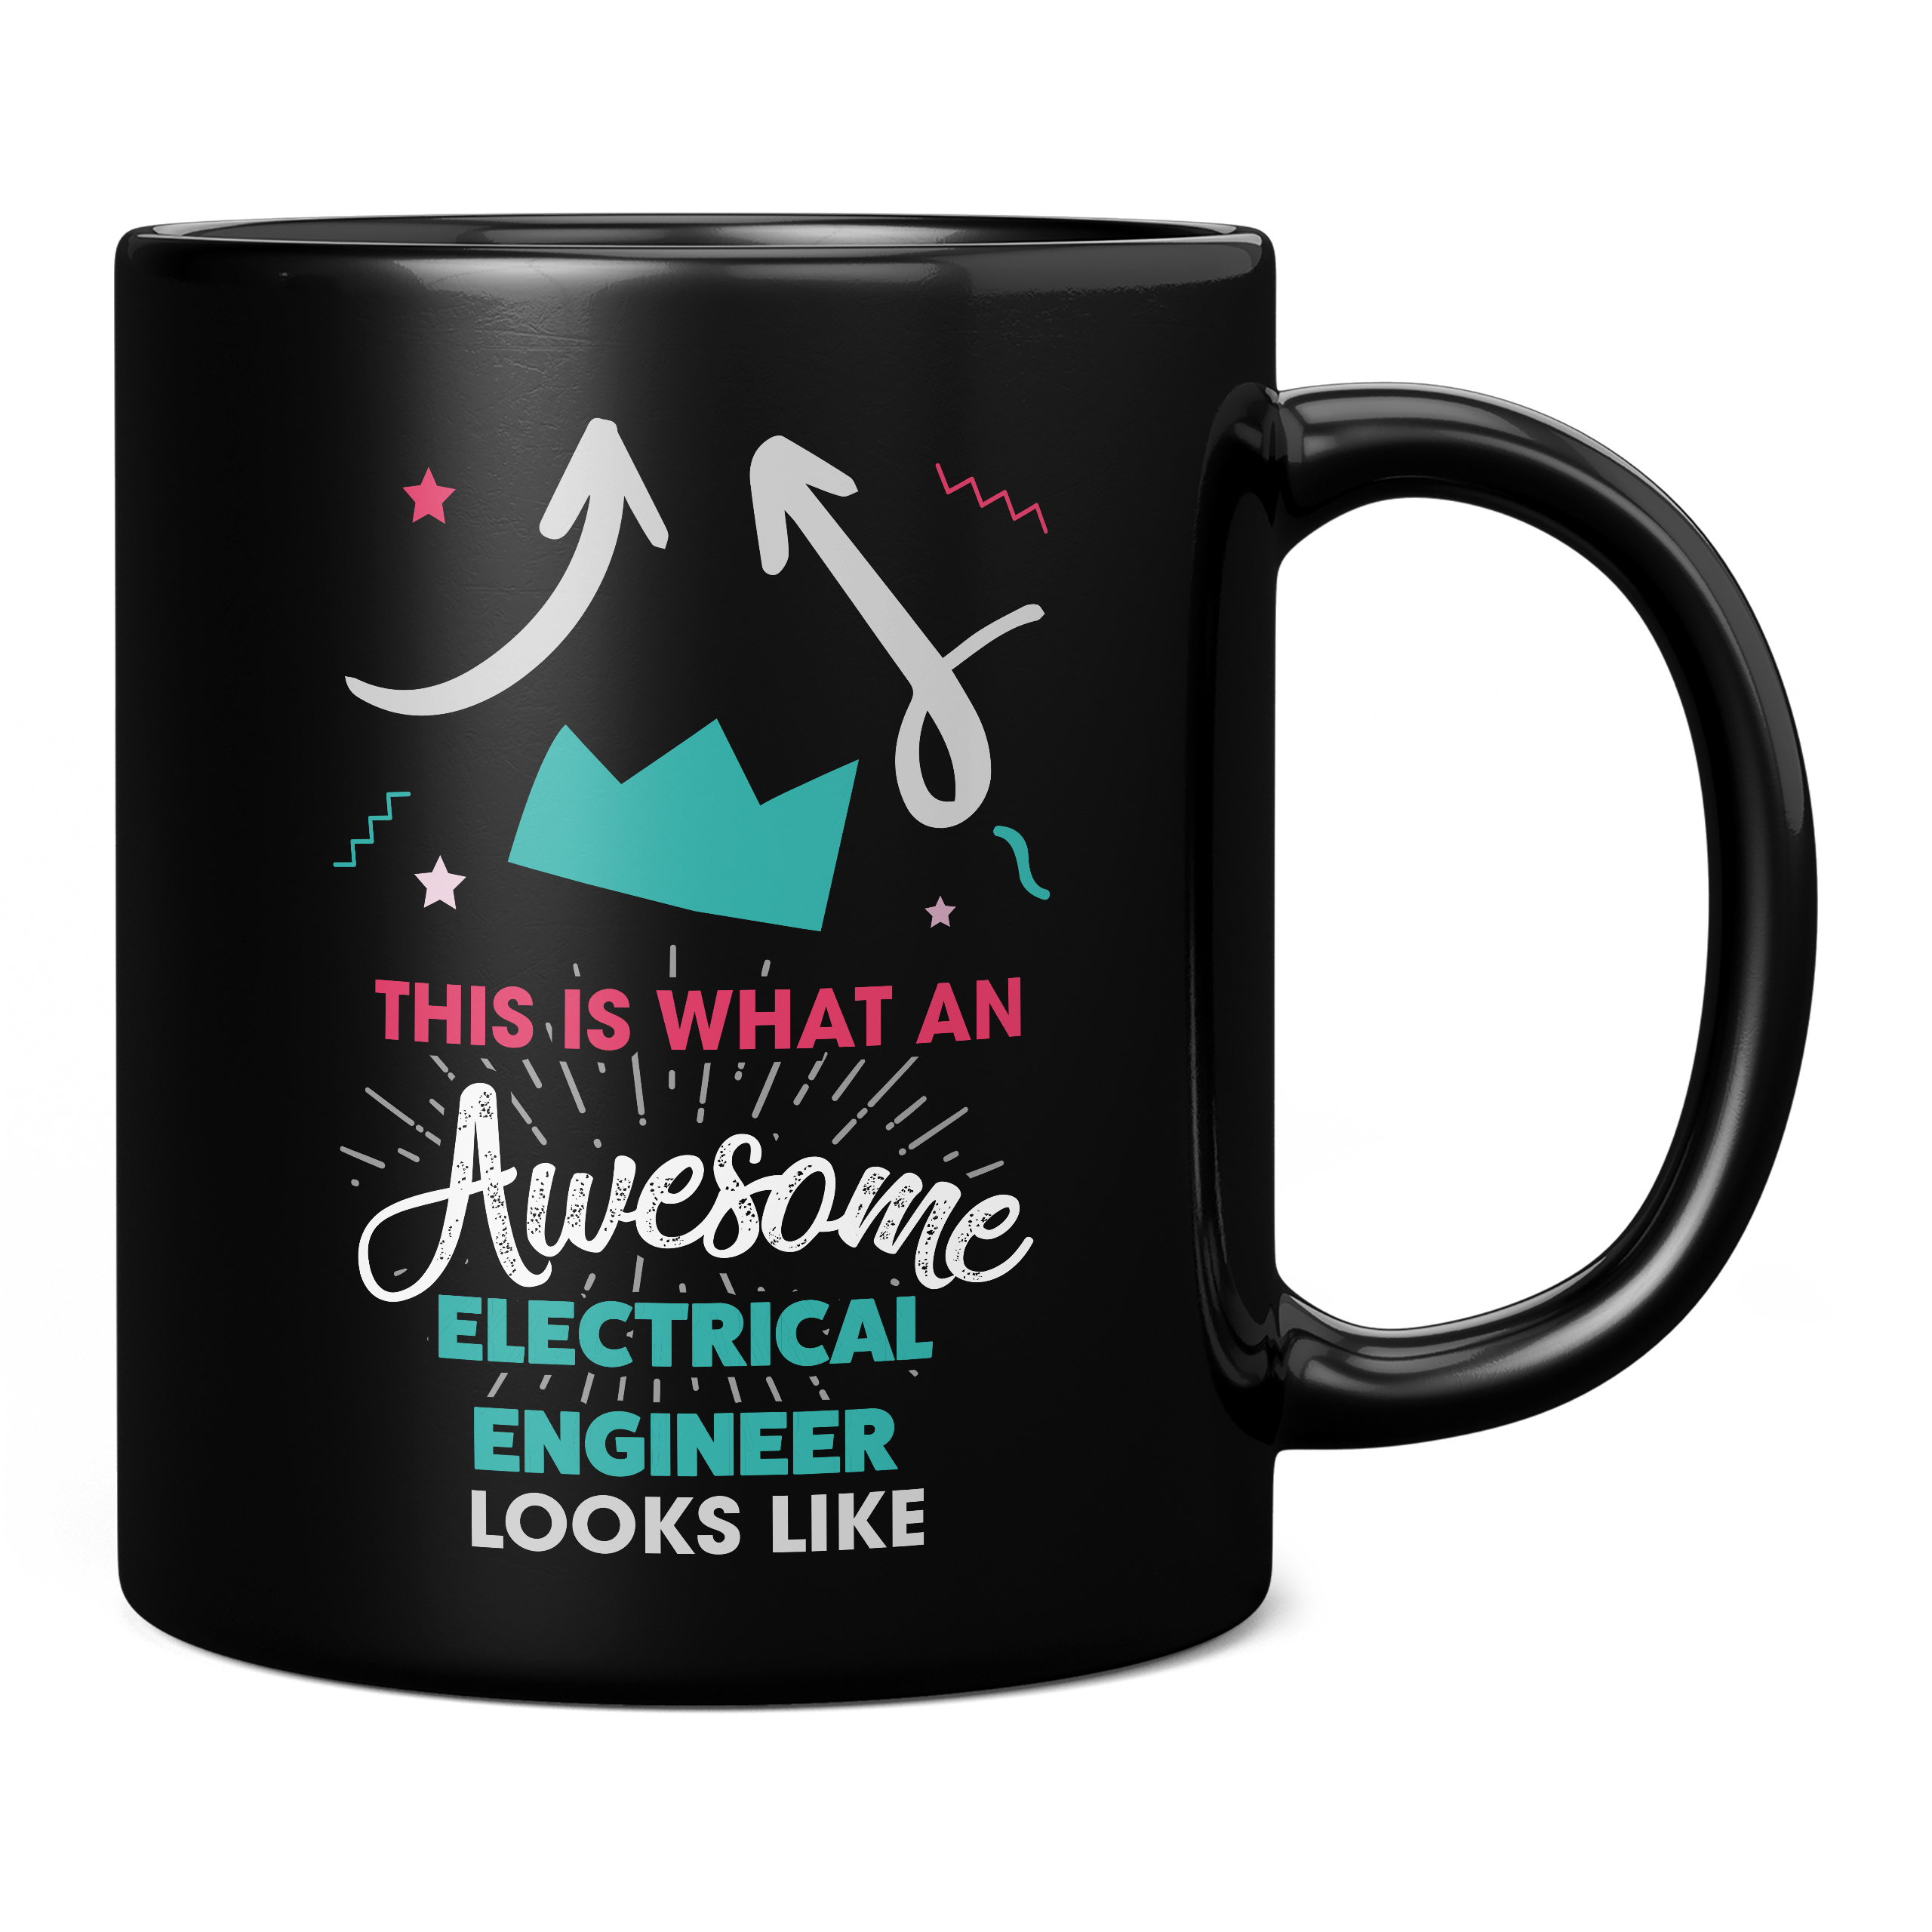 THIS IS WHAT AN AWESOME ELECTRICAL ENGINEER LOOKS LIKE 11OZ NOVELTY MUG